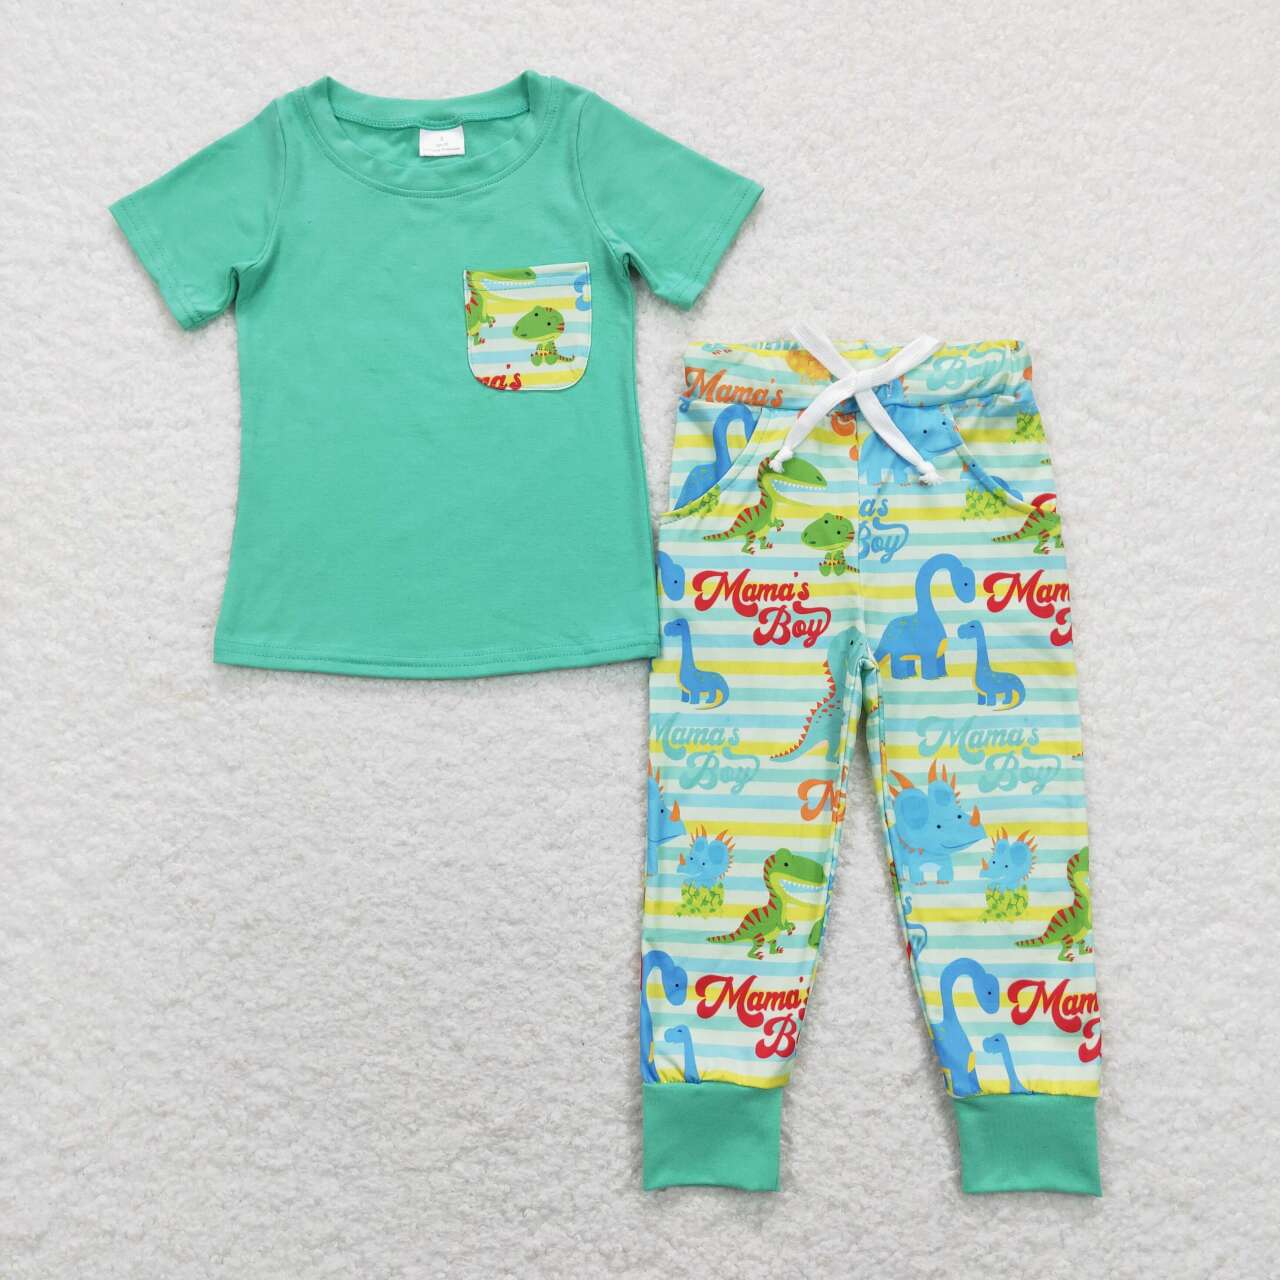 BSPO0204 mama's boy dinosaur pocket short sleeve green and yellow striped trousers suit